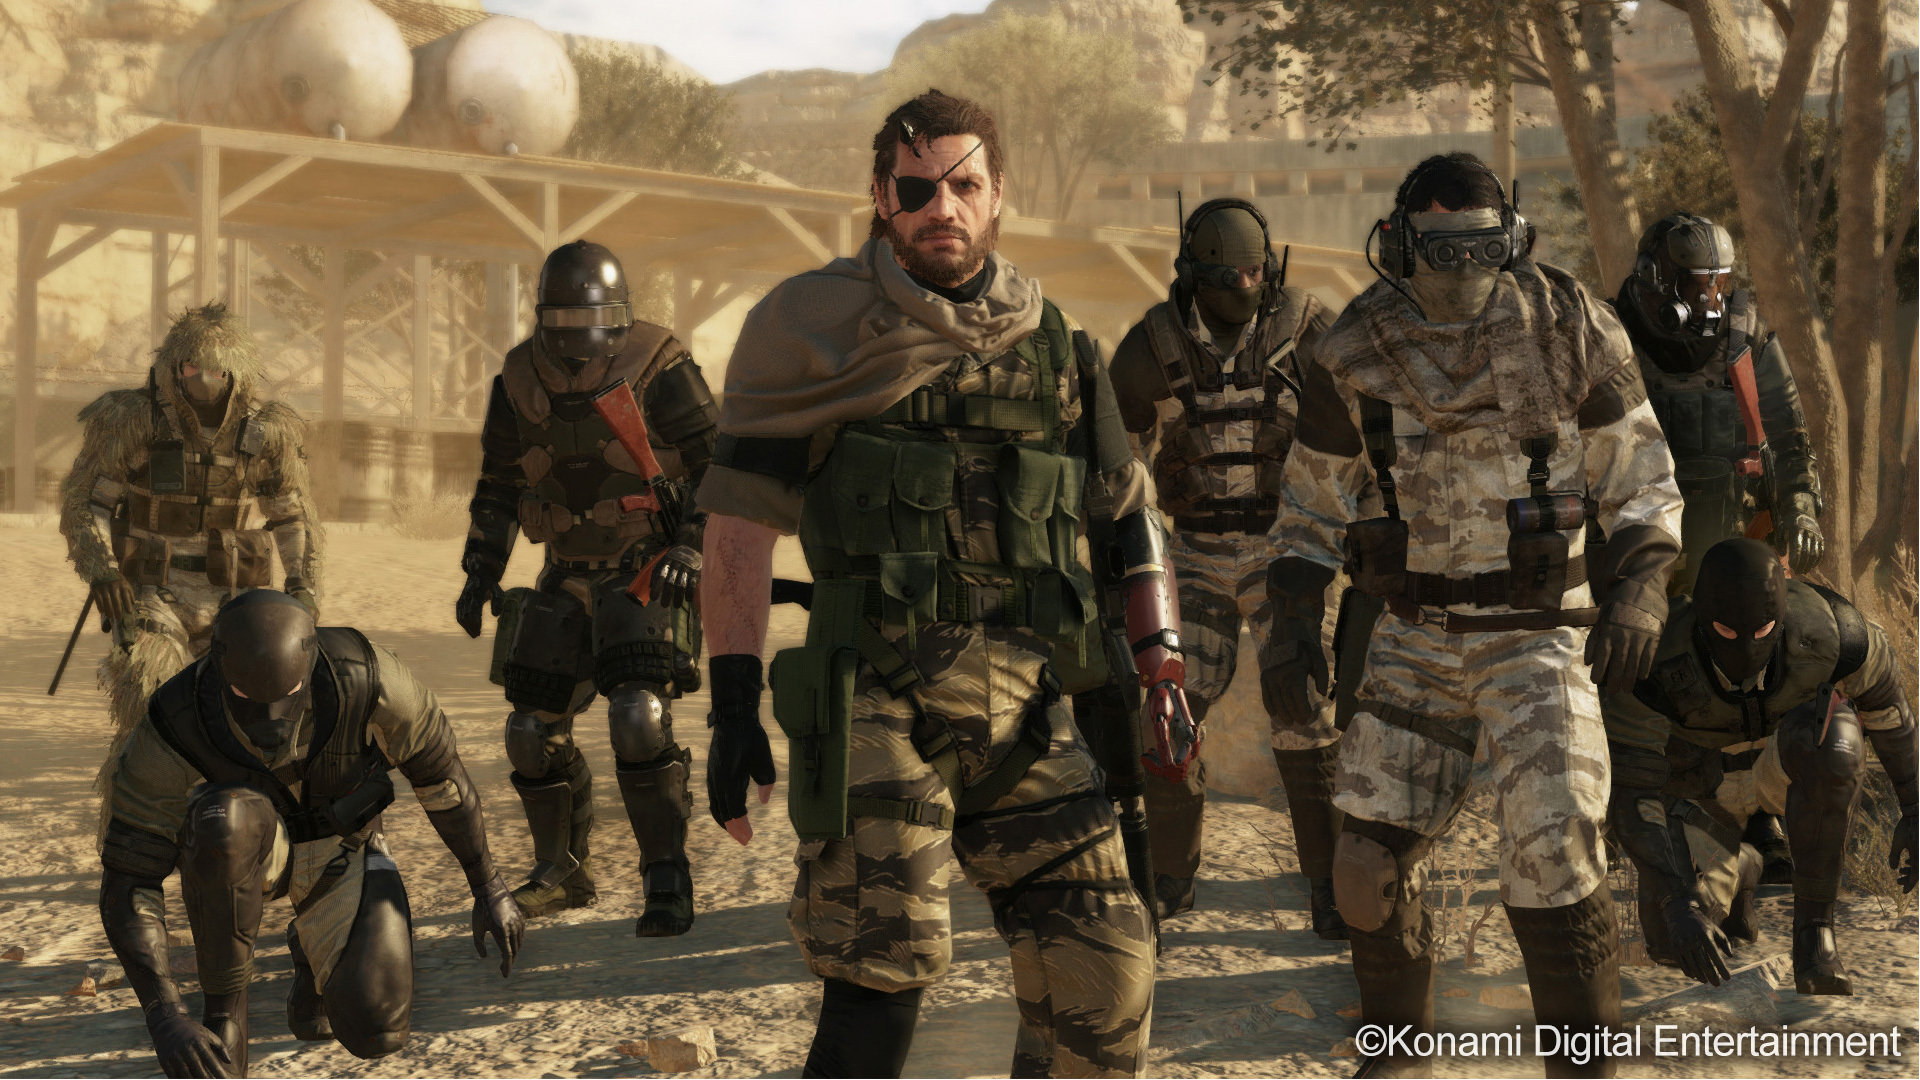 Awesome Metal Gear Solid 5 (V): The Phantom Pain (MGSV 5) free wallpaper ID:460450 for hd 1920x1080 computer